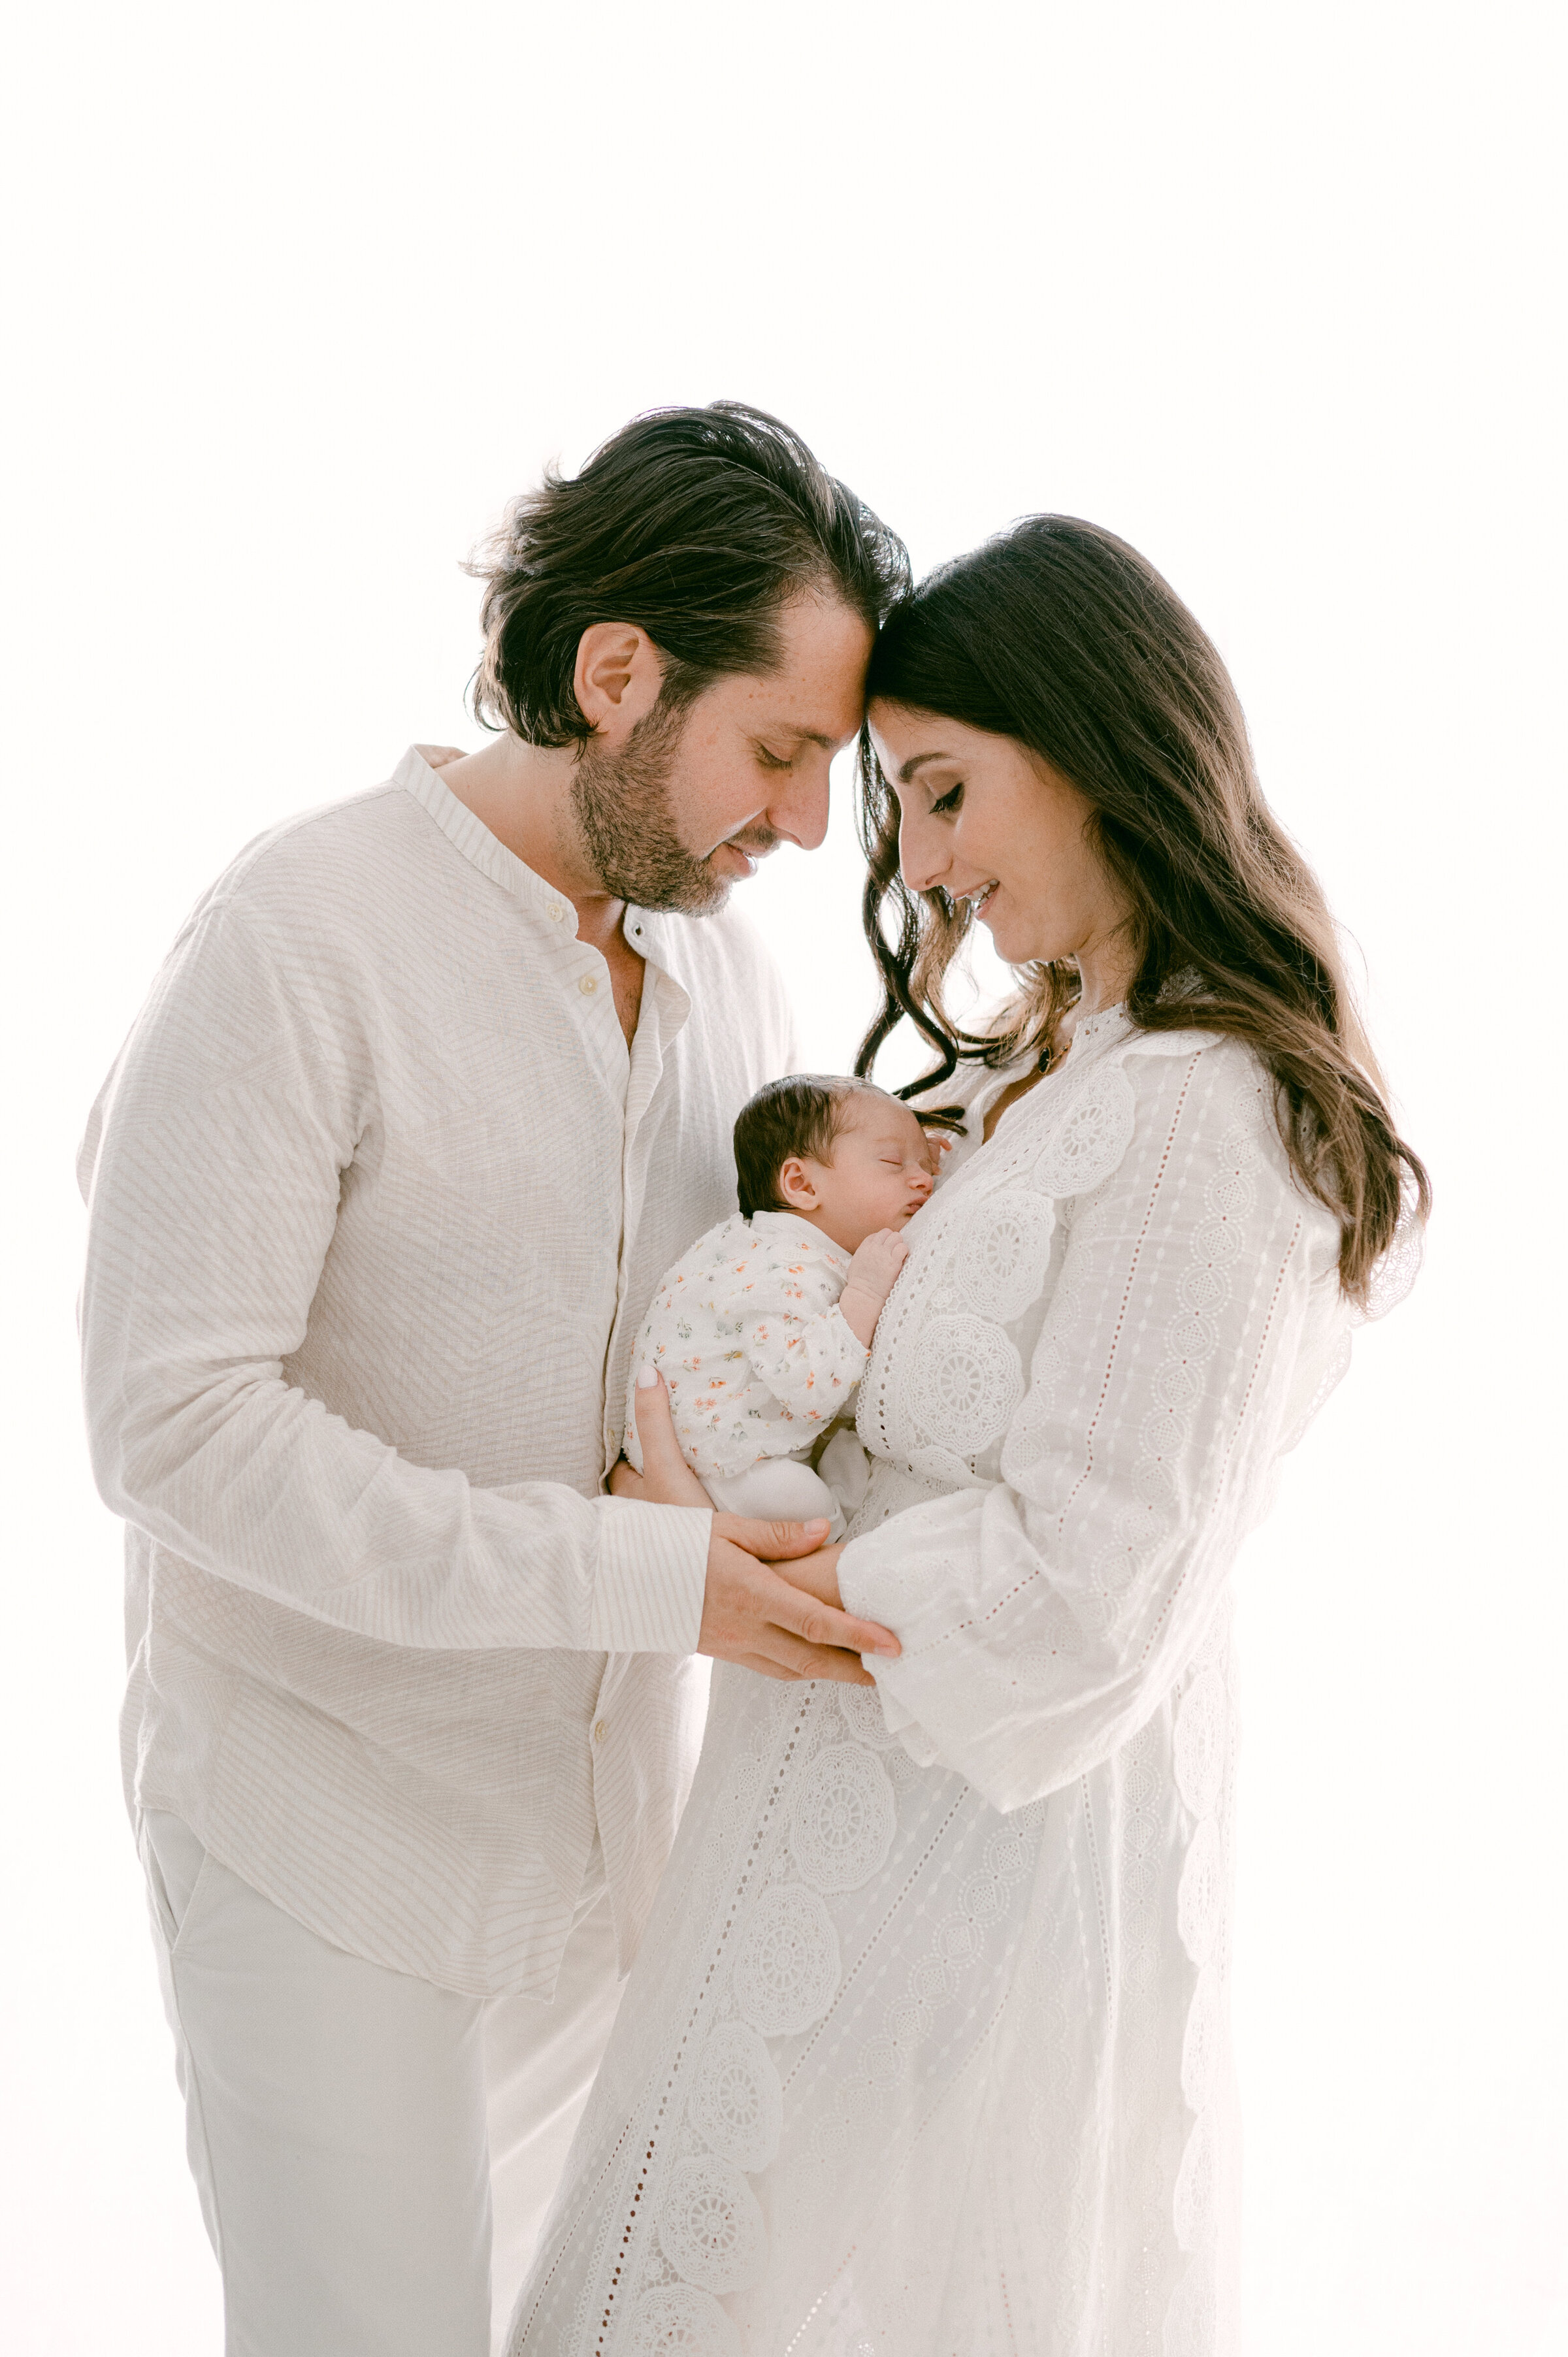 Dad and mom holding newborn by Miami Family Photographer